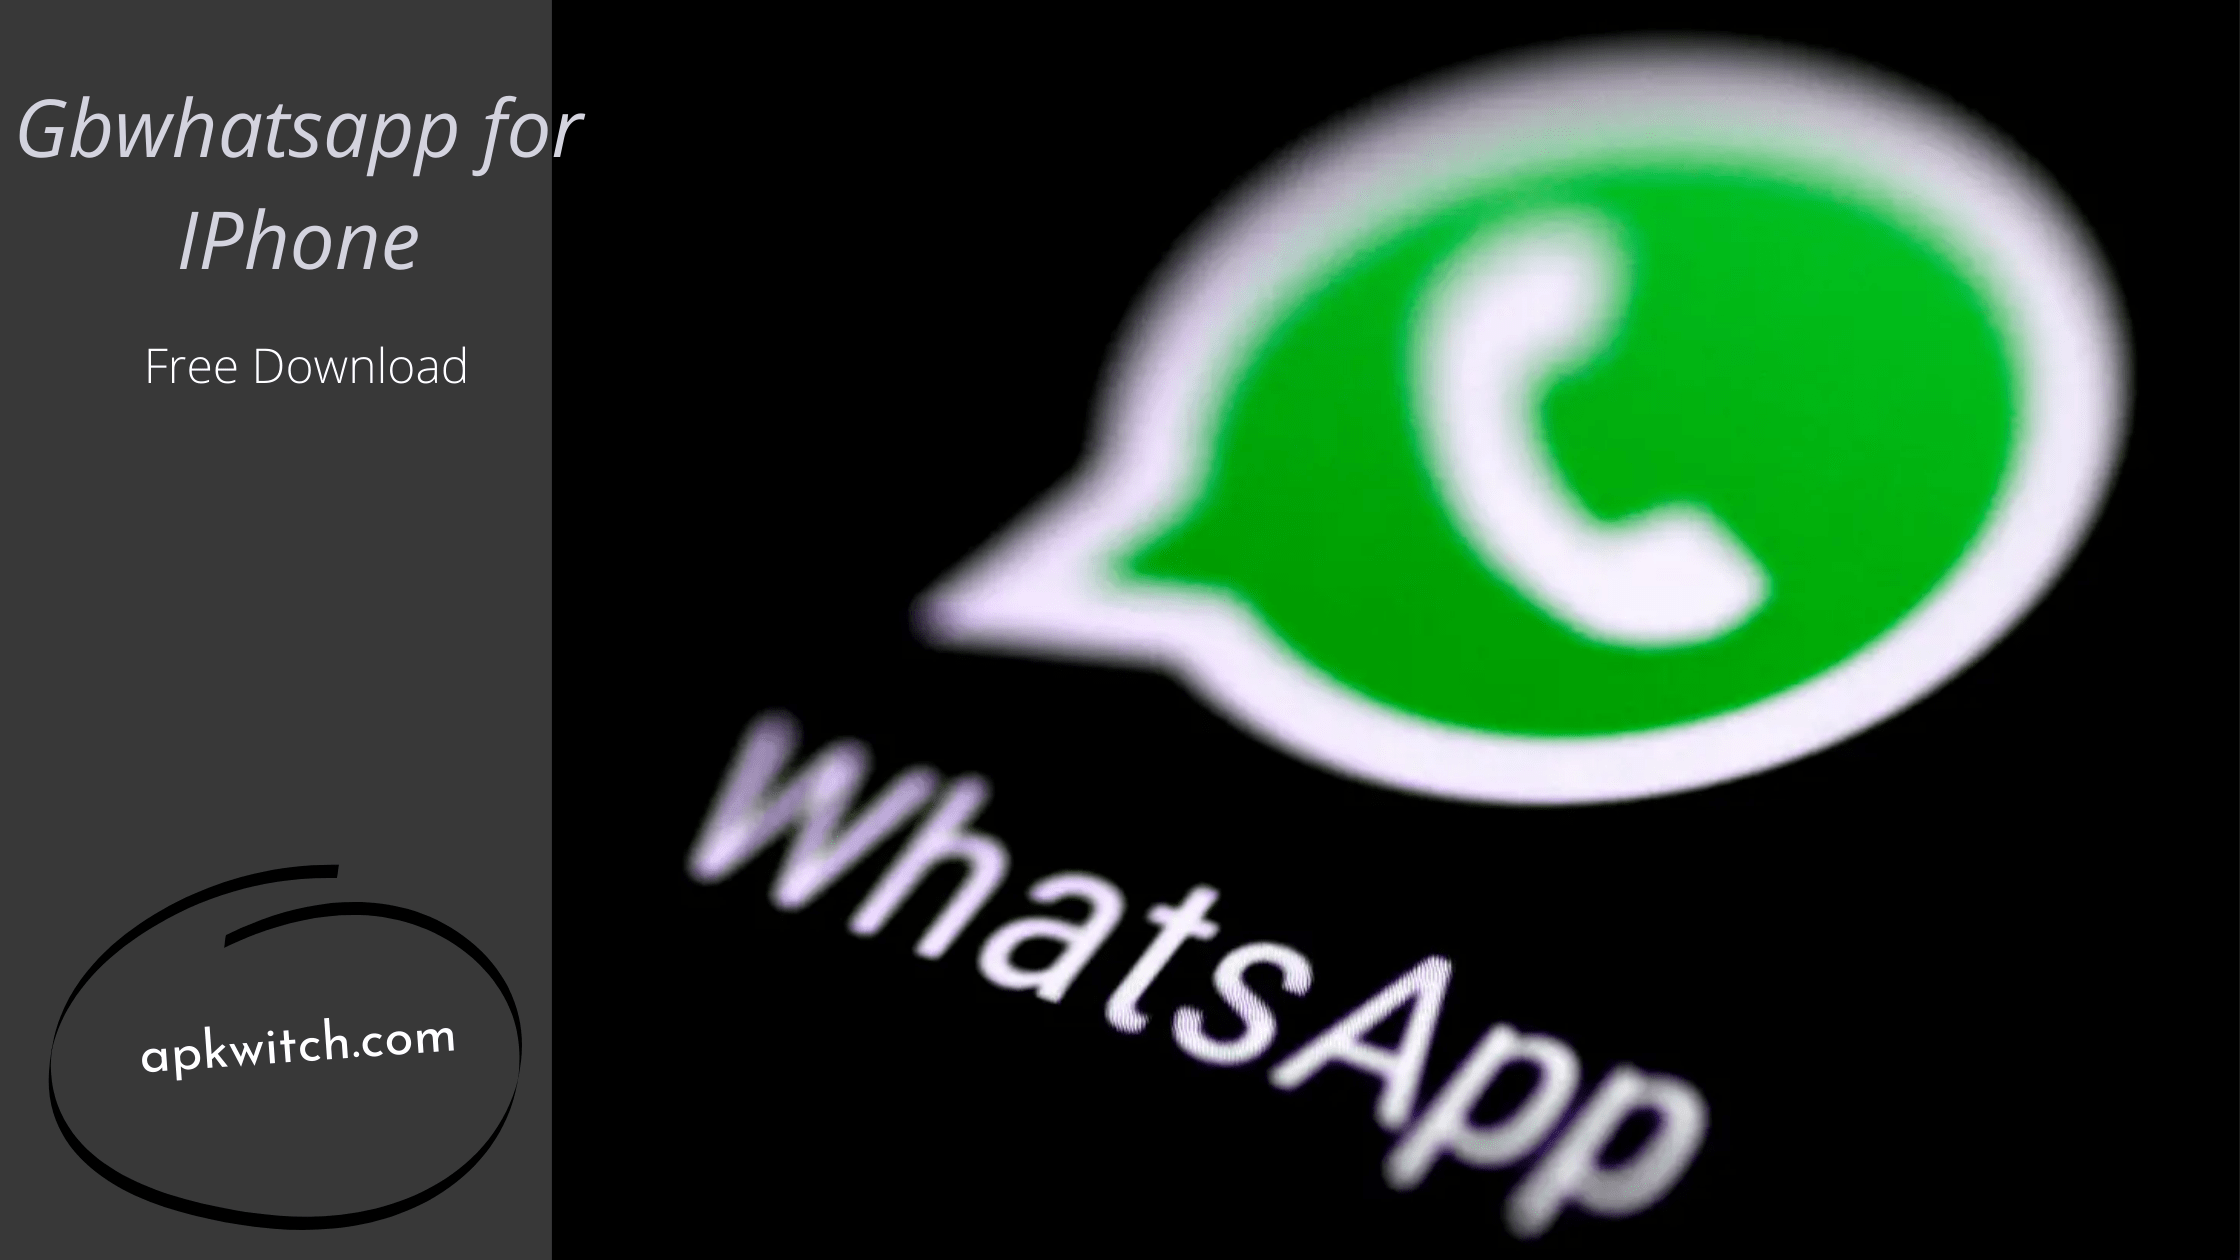 Gb Whatsapp IOS Features 2020 | Explore before Downloading